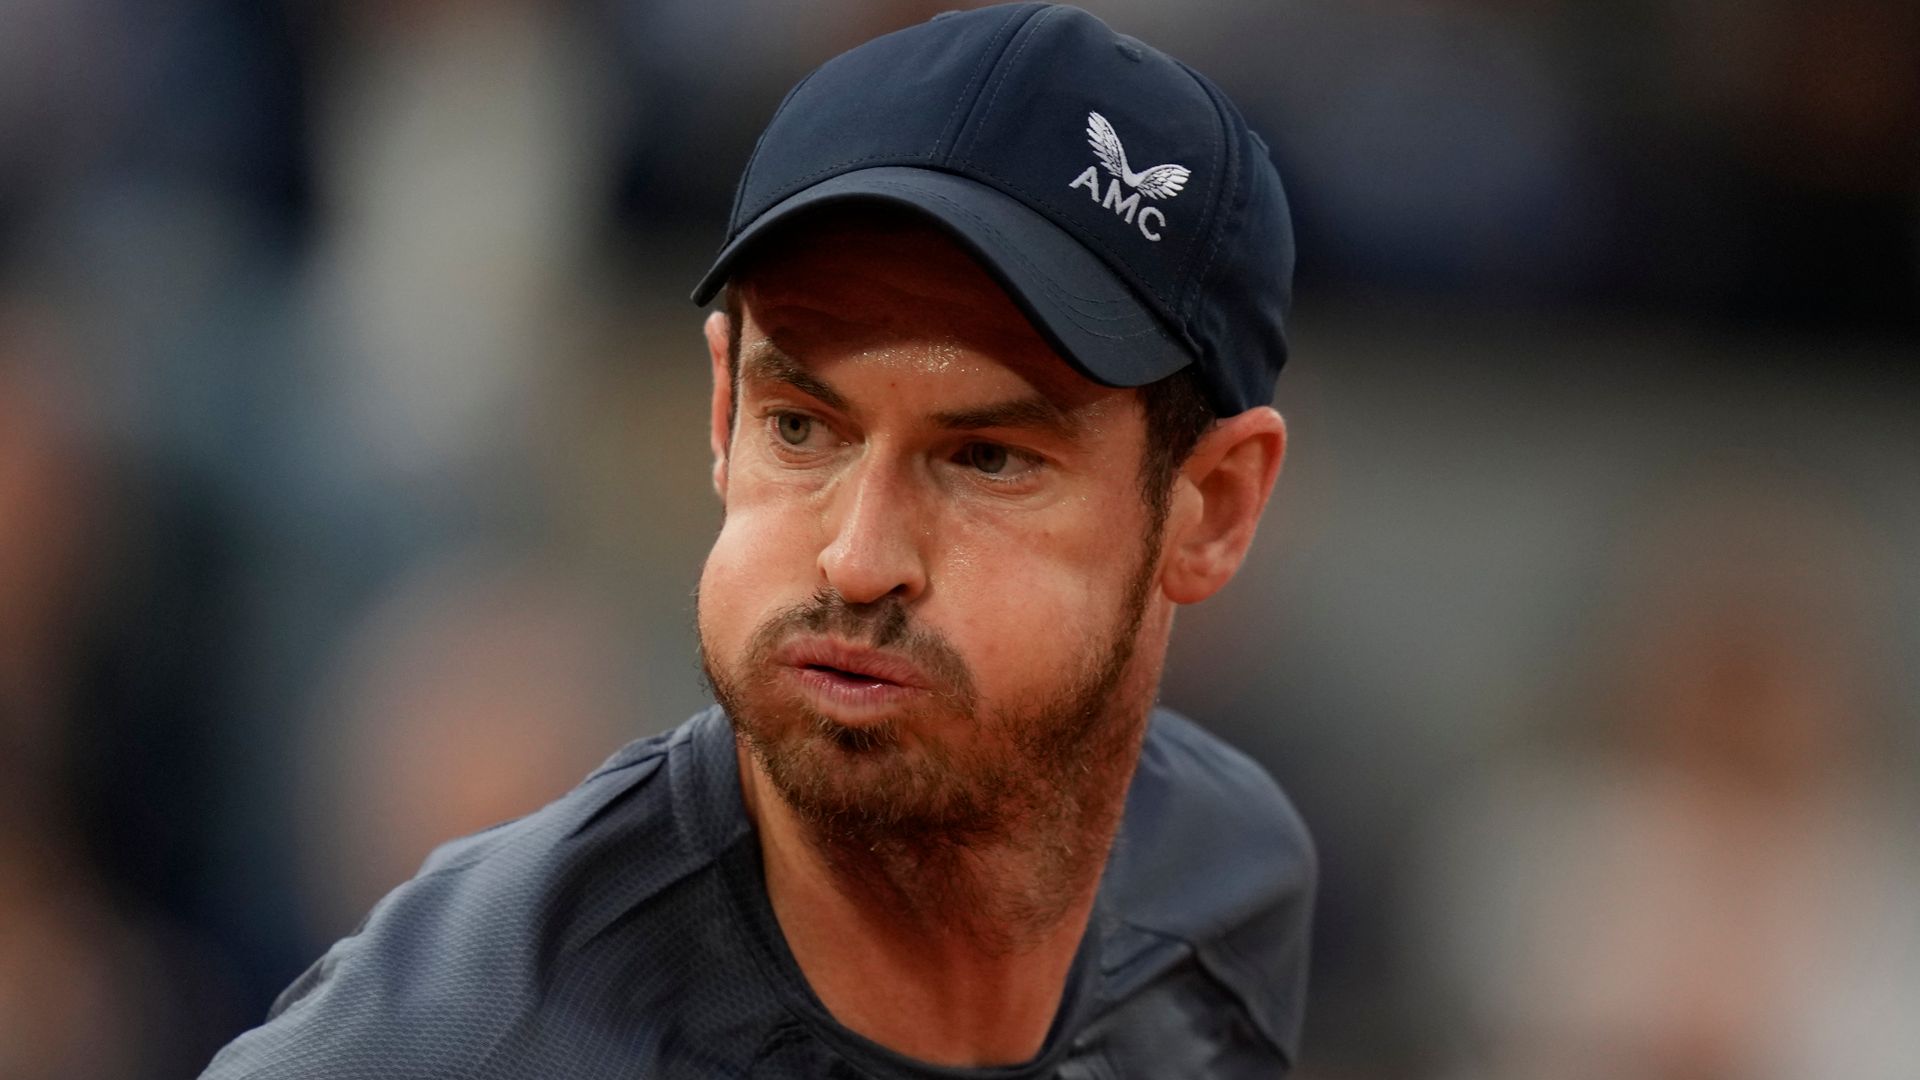 French Open LIVE! Murray loses in straight sets to Wawrinka